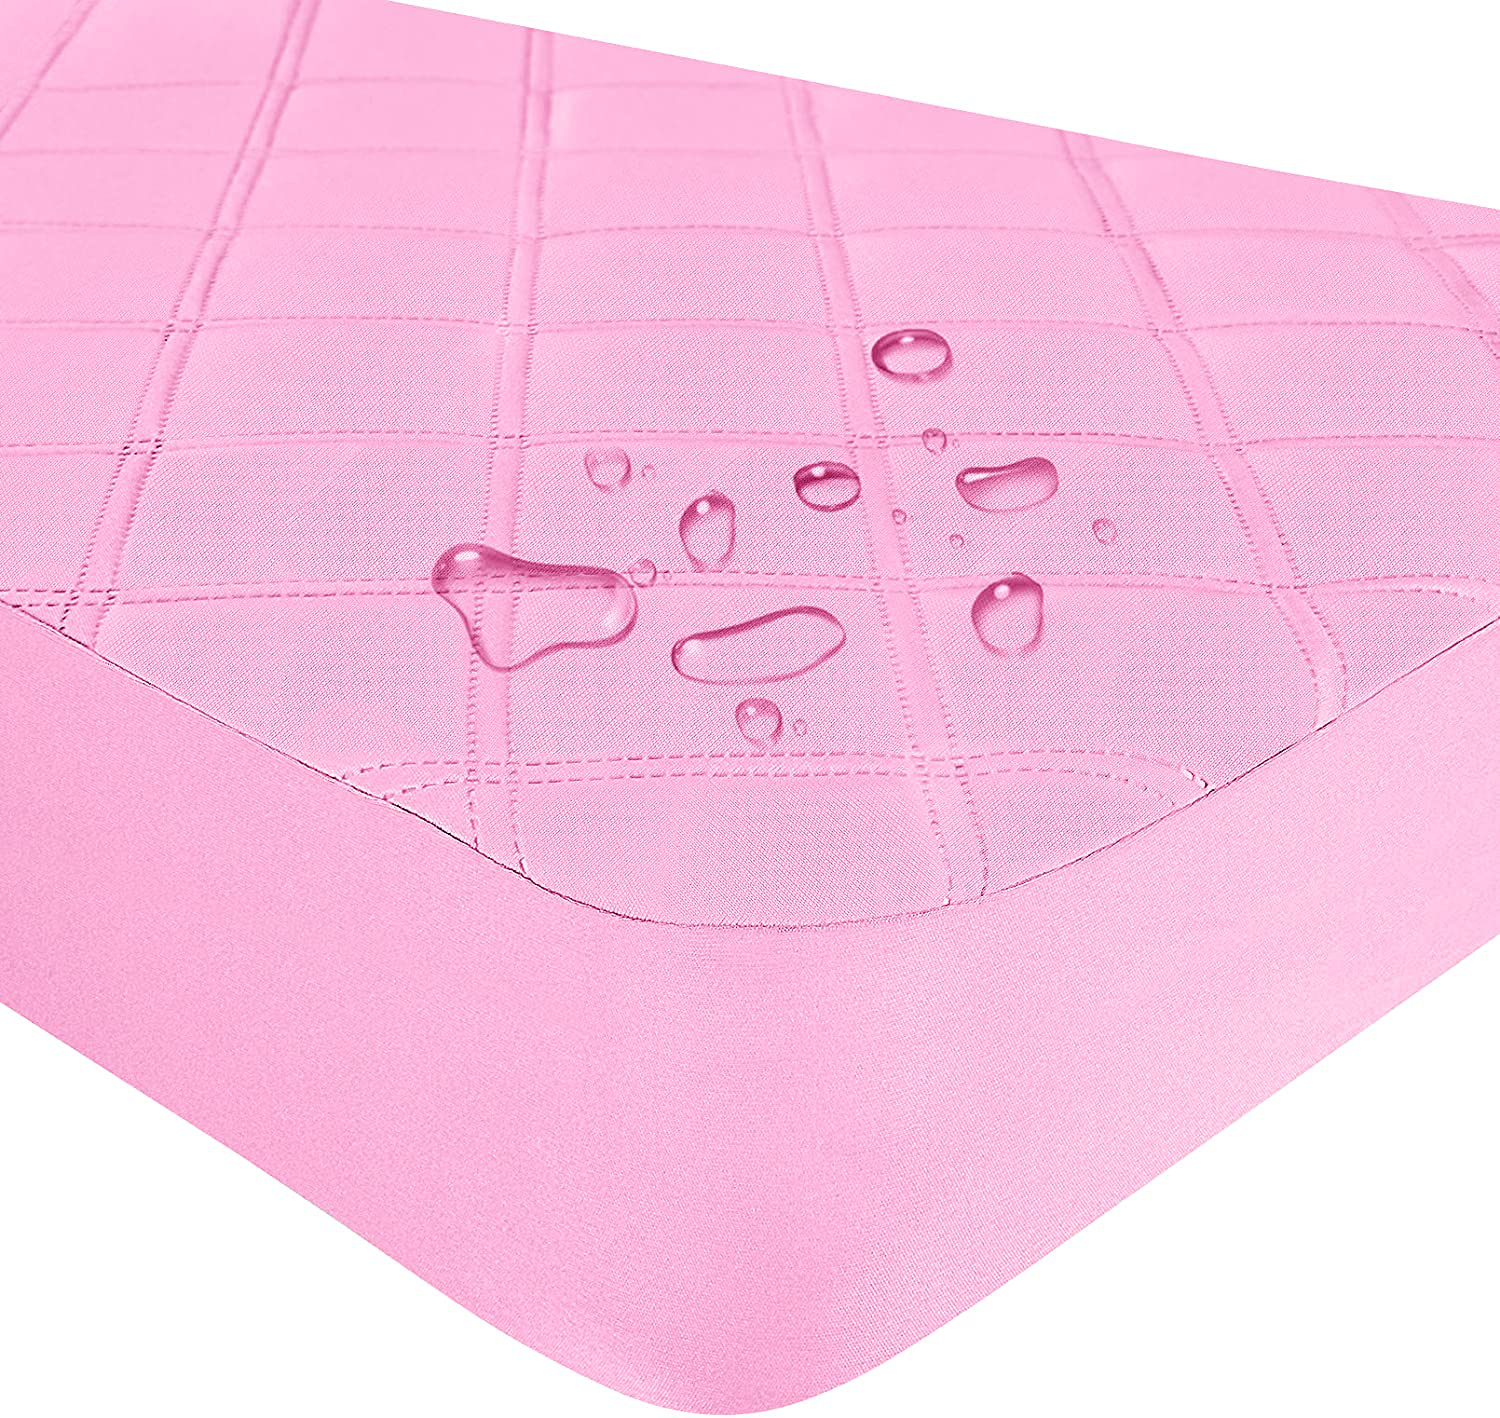 Waterproof Fitted Crib Mattress Pad and Toddler Crib Mattress Protective Baby Crib Mattress Cover Sheets Protector Bedding Sets Breathable & Hypoallergenic for Boys and Girls (Pink, Crib 28''x52'')